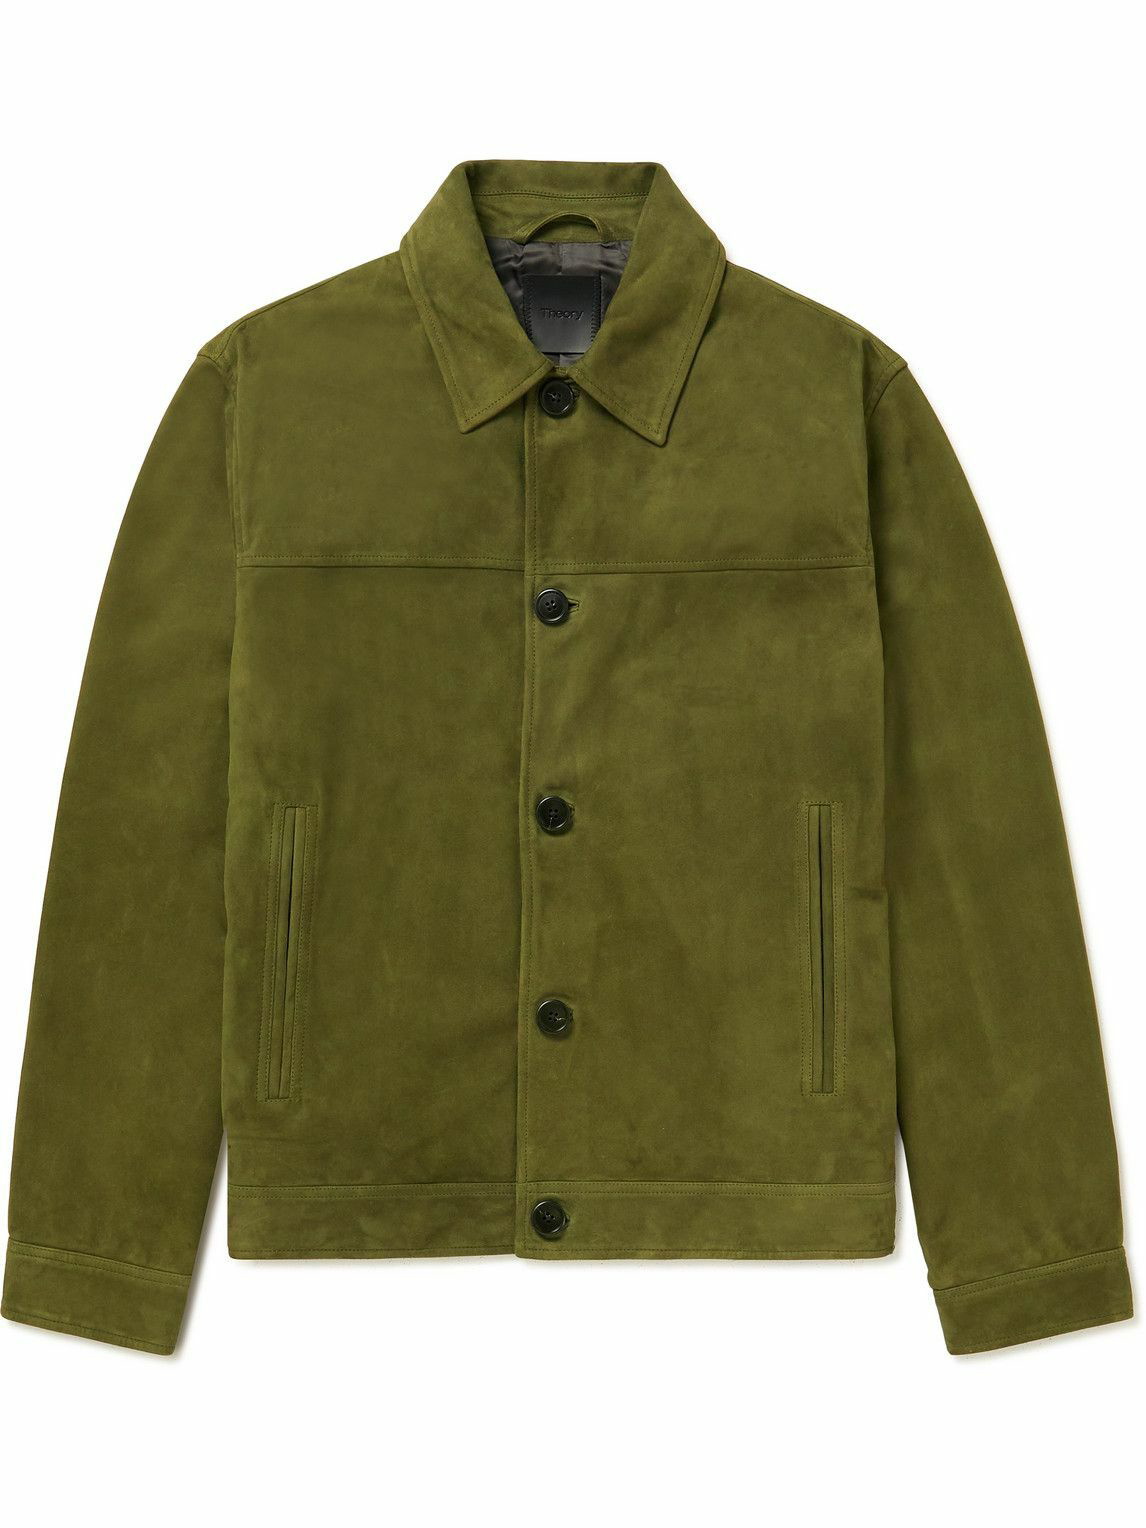 Theory - Suede Trucker Jacket - Green Theory